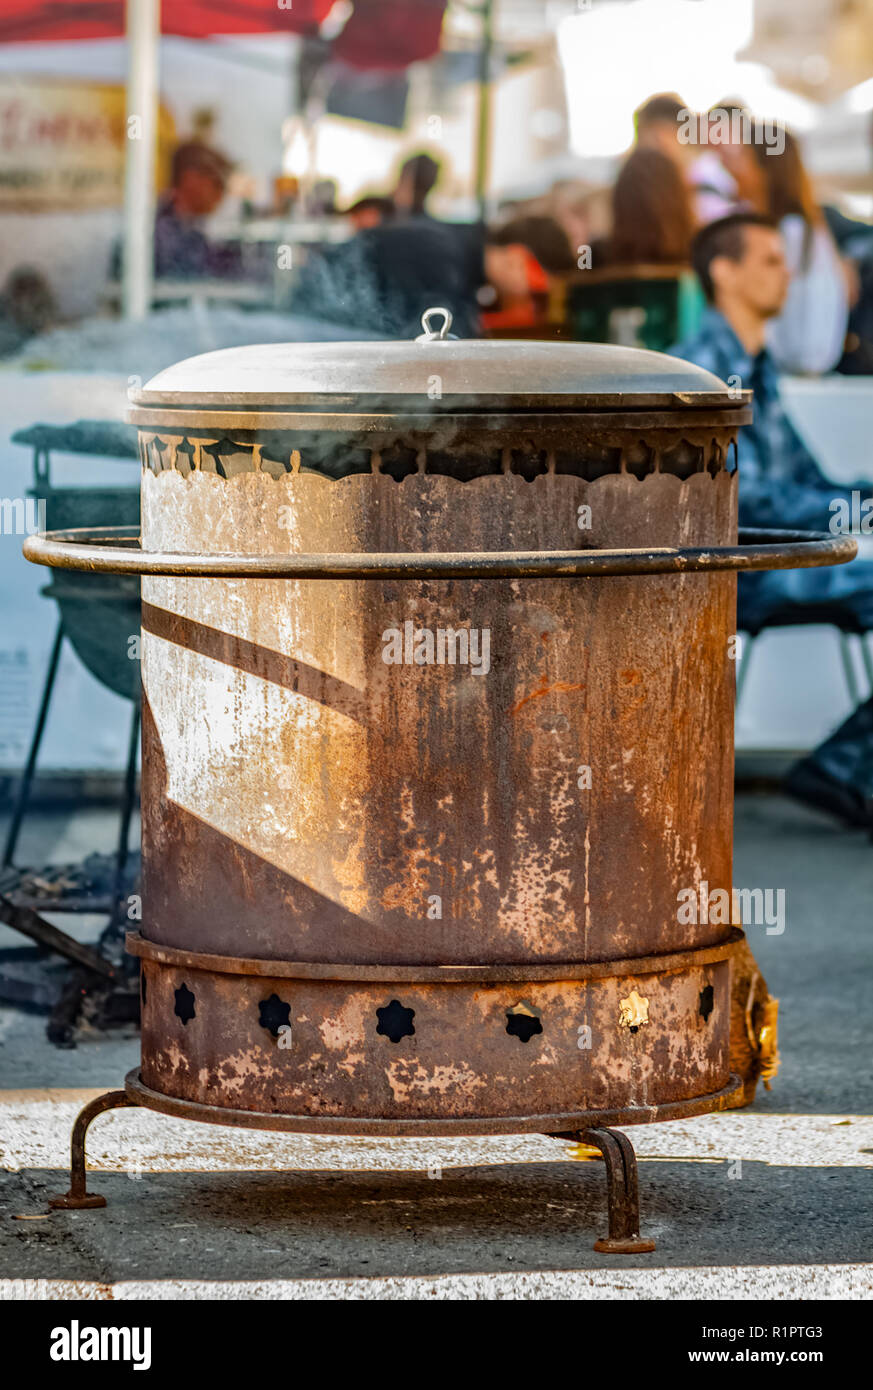 Multiple Purpose Of Boiler Pot Great For Your Food Cooking Stock Photo,  Picture and Royalty Free Image. Image 16445881.